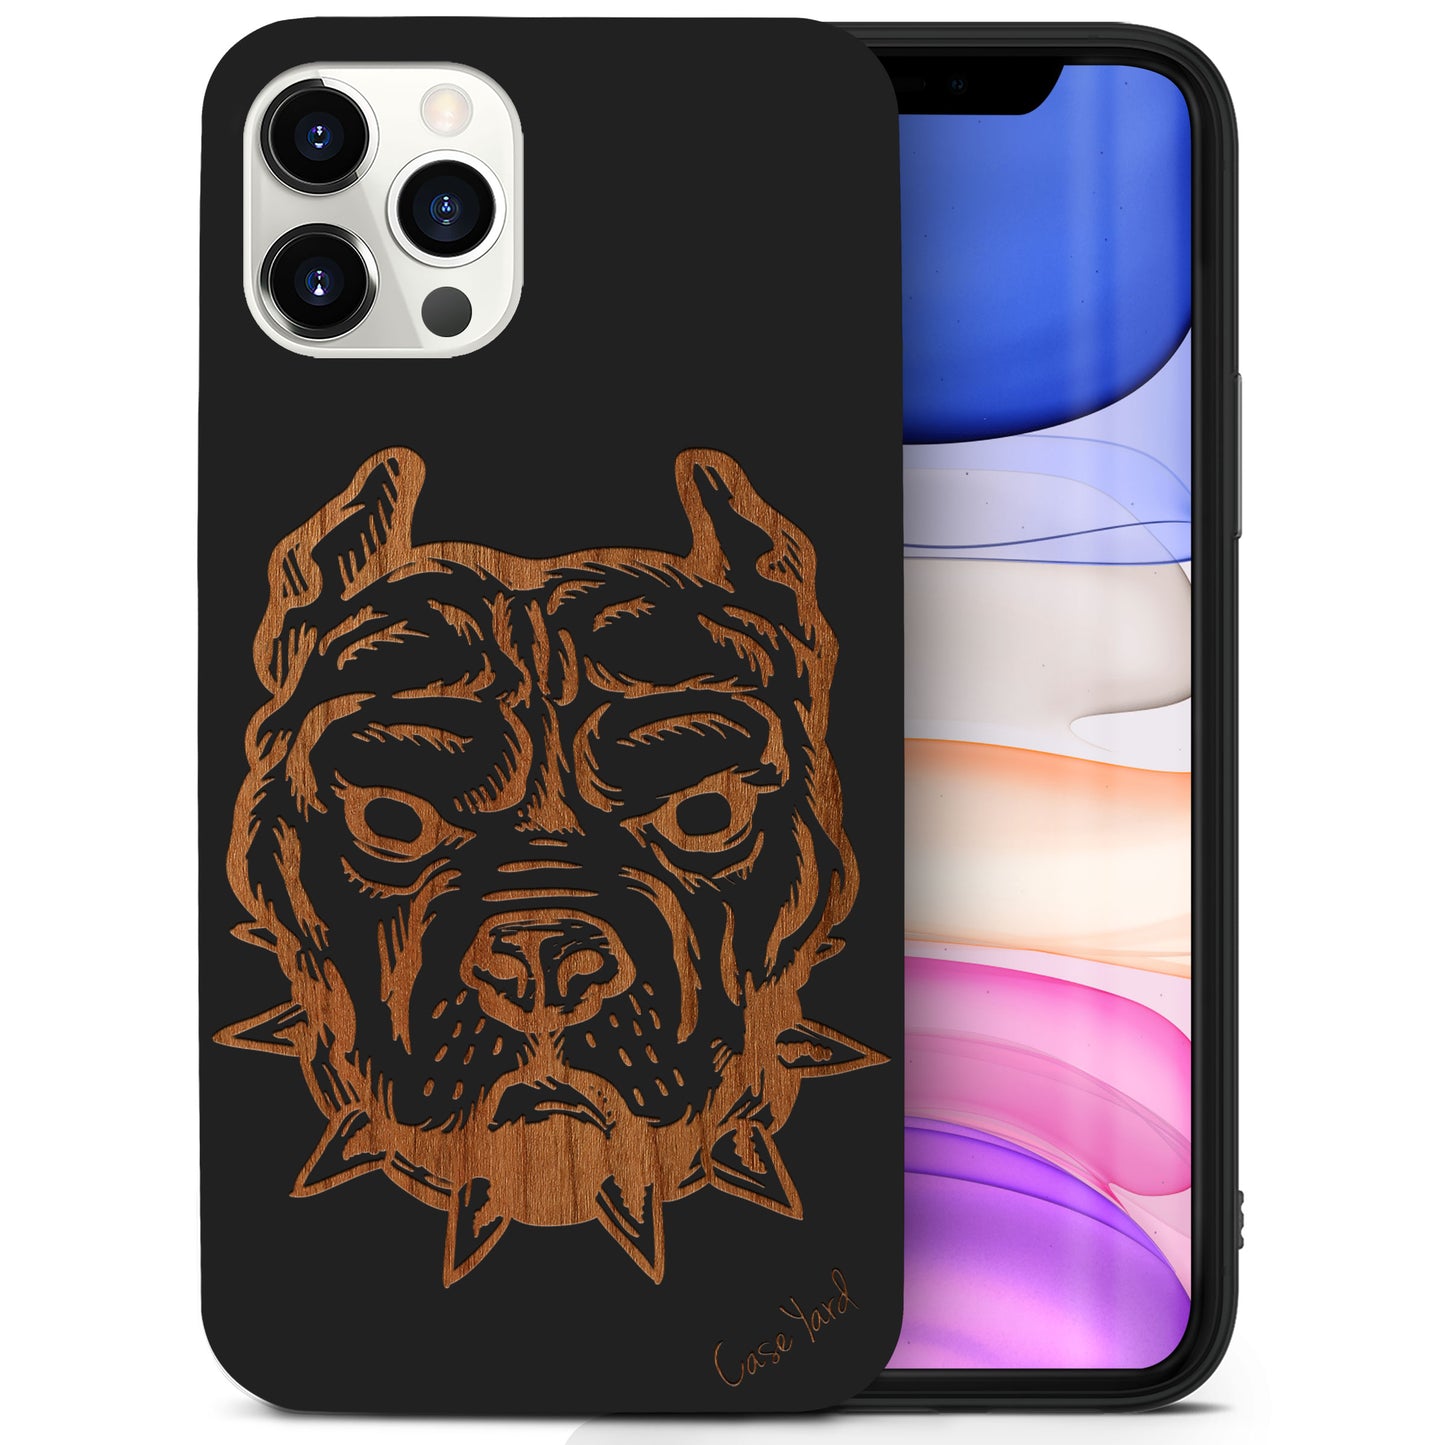 Wooden Cell Phone Case Cover, Laser Engraved case for iPhone & Samsung phone Pitbull Design